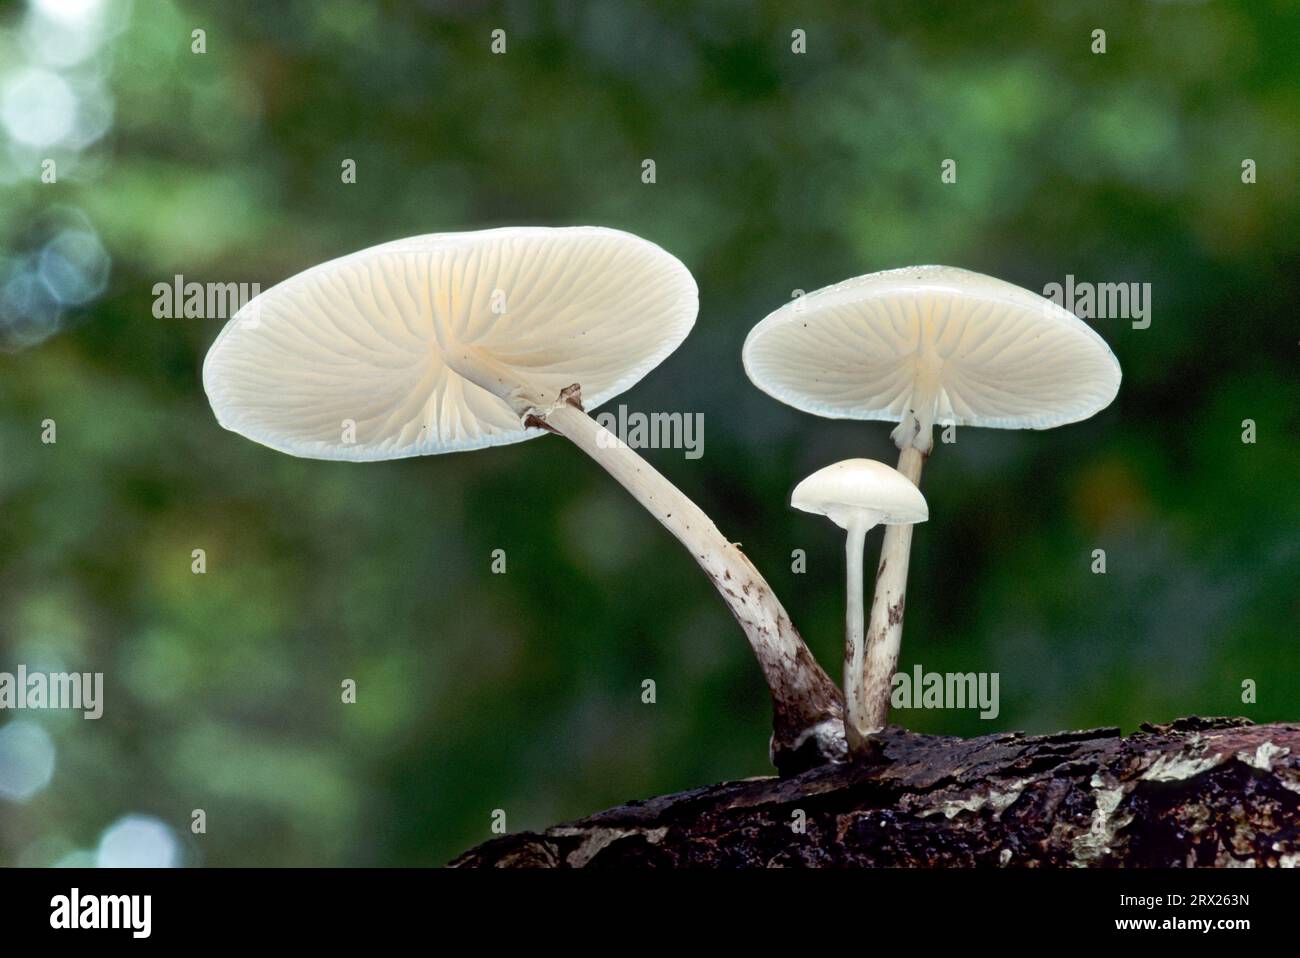 Porcelain fungus (Oudemansiella mucida) likes to grow cespitose at branches and trunks from the European Beech (Slimy Beech Fungus) Stock Photo